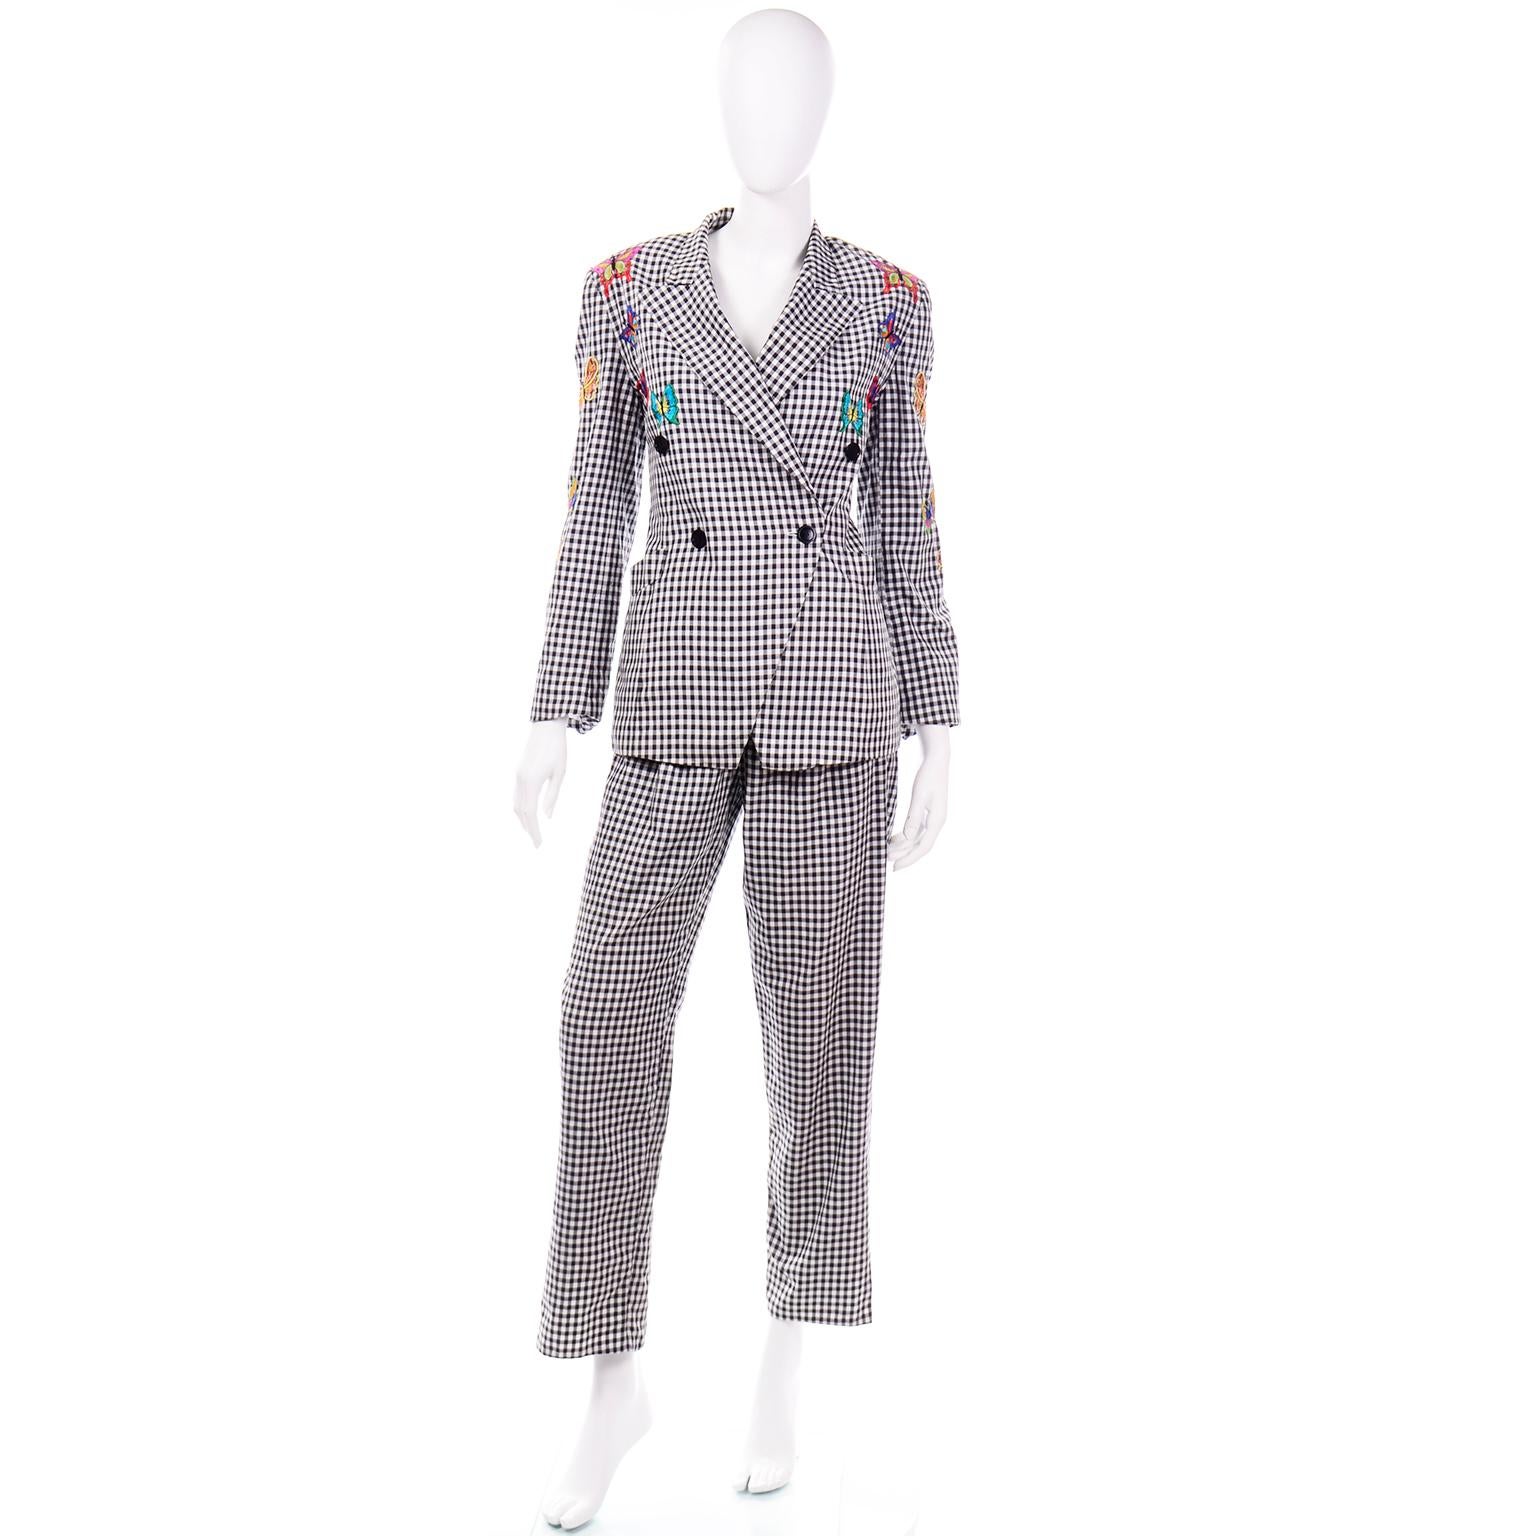 This is a Margaretha Ley for Escada 1980's black and white cotton gingham pant suit with a blazer style jacket and a pair of high waisted trousers. You can break this suit up to wear the pieces as separates with items you already own in your closet,